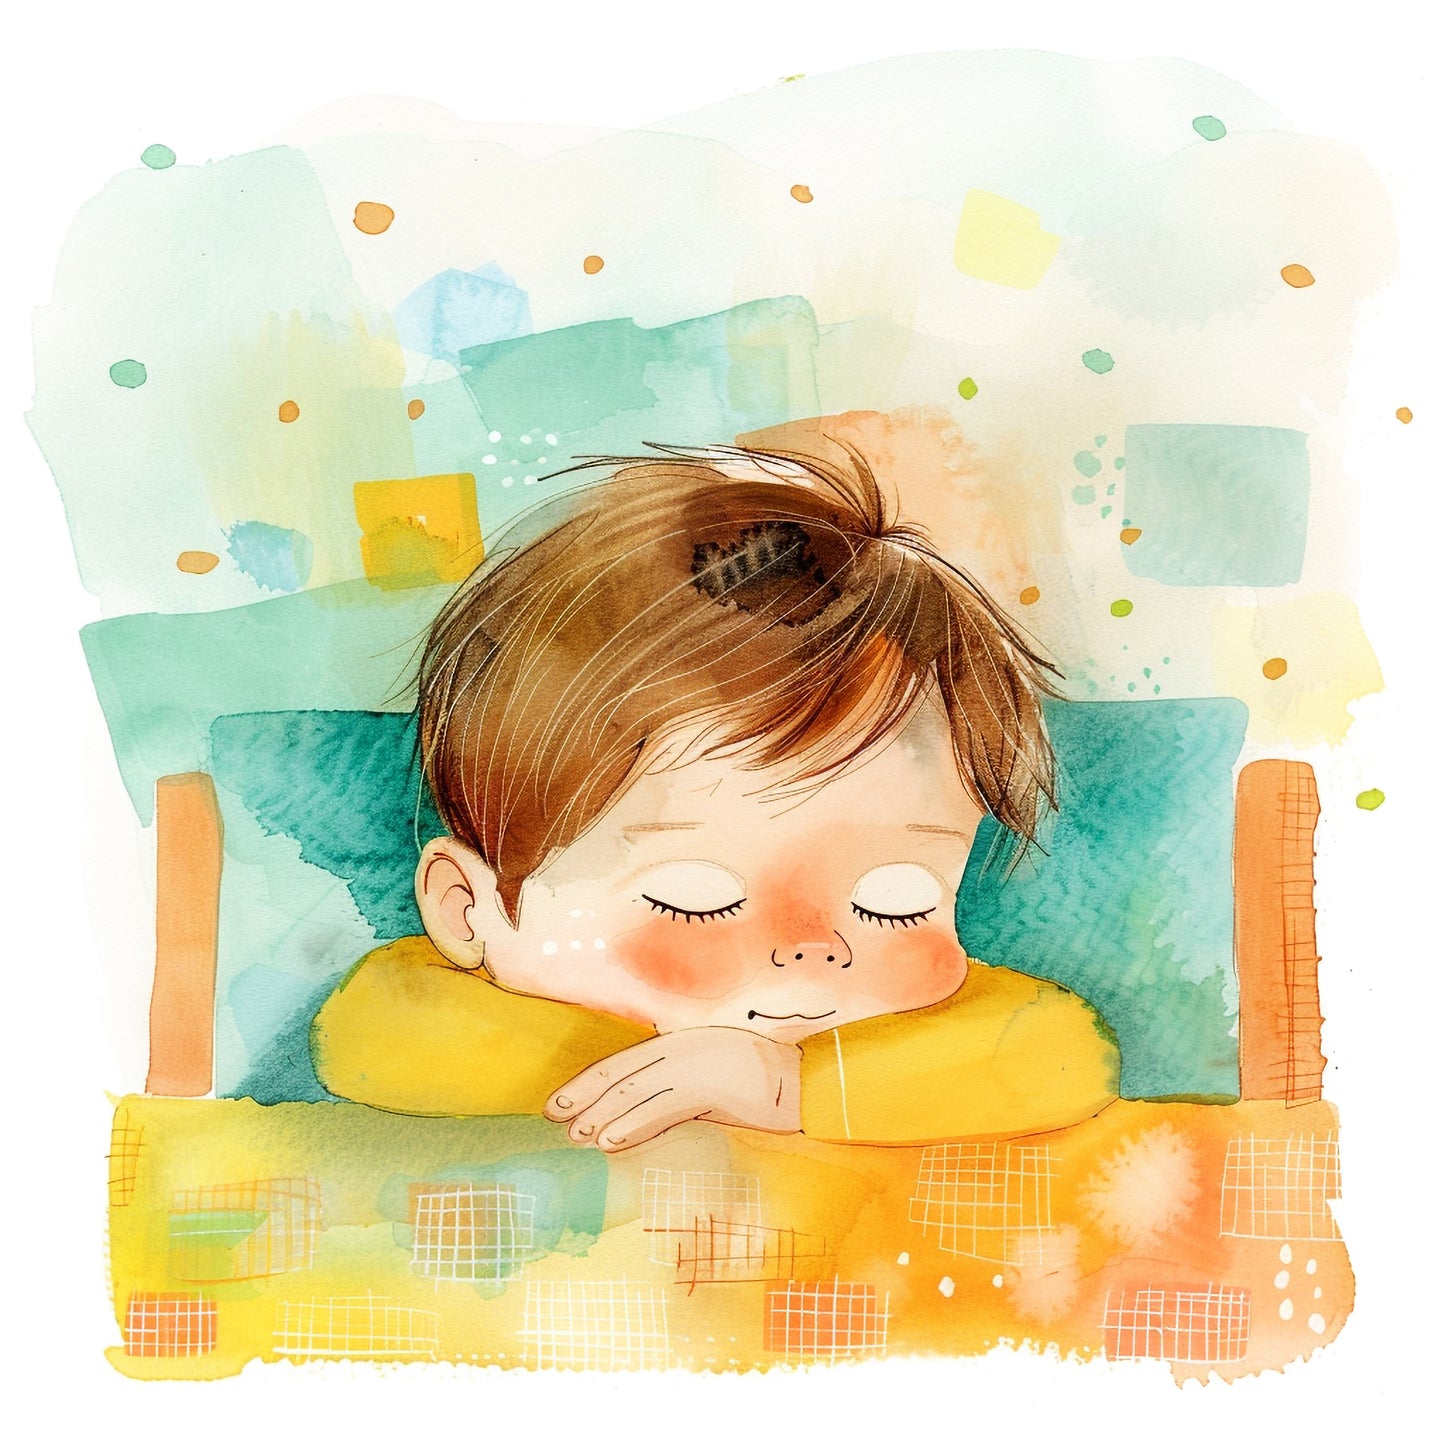 Peaceful Sleeping Baby in Watercolor Illustration